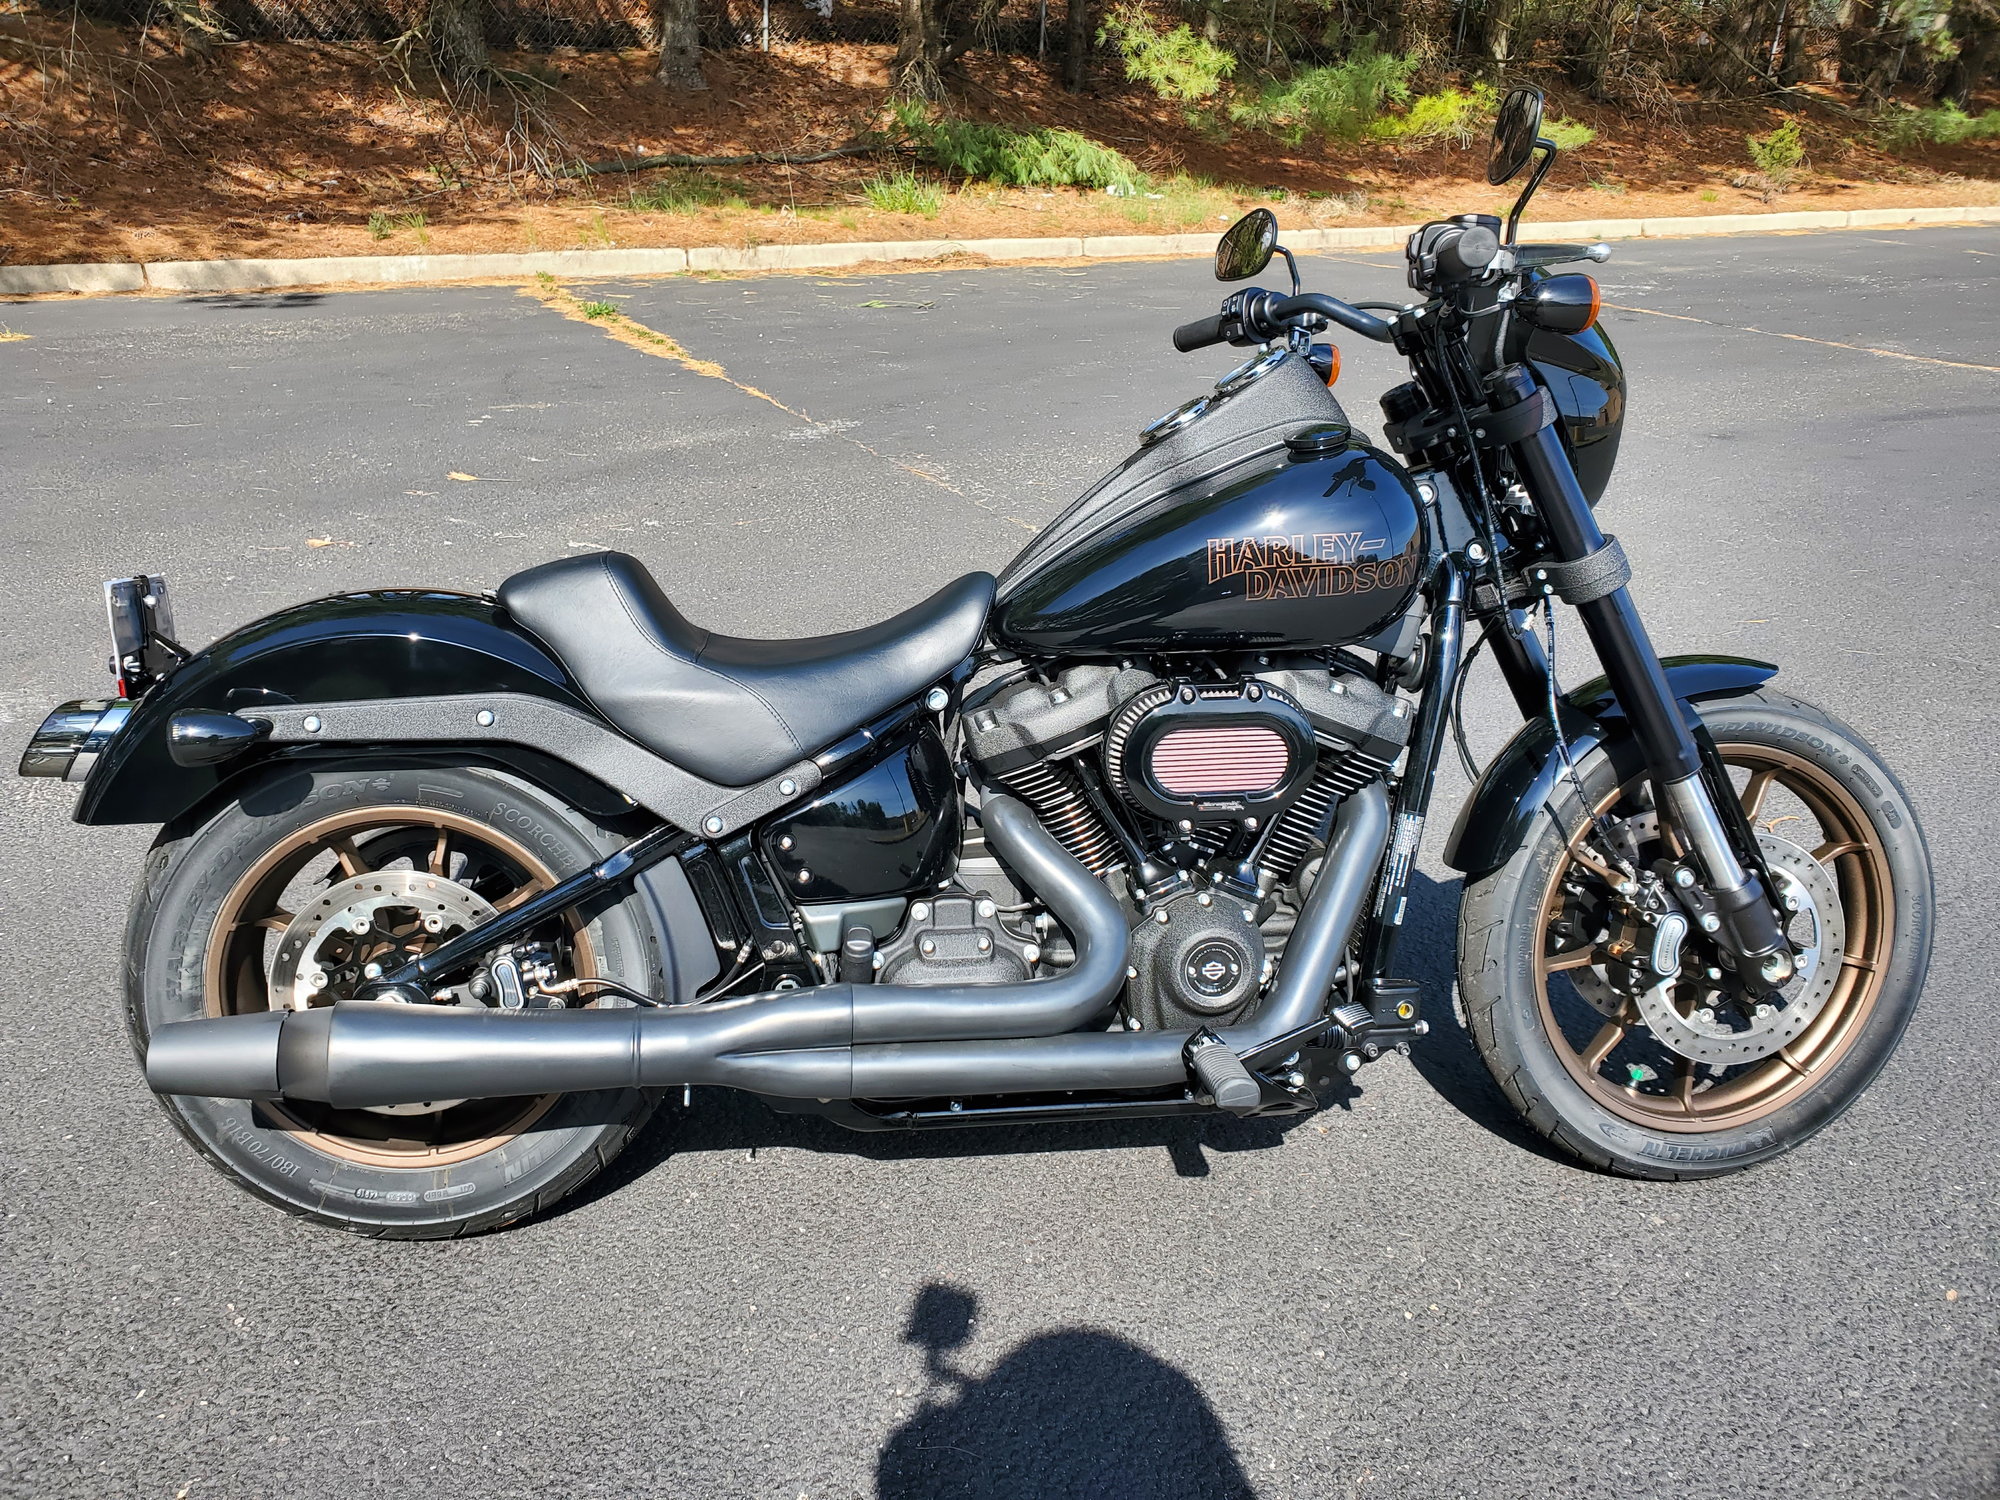 2020 Low Rider S Stage 2 Recommendations Page 2 Harley Davidson Forums